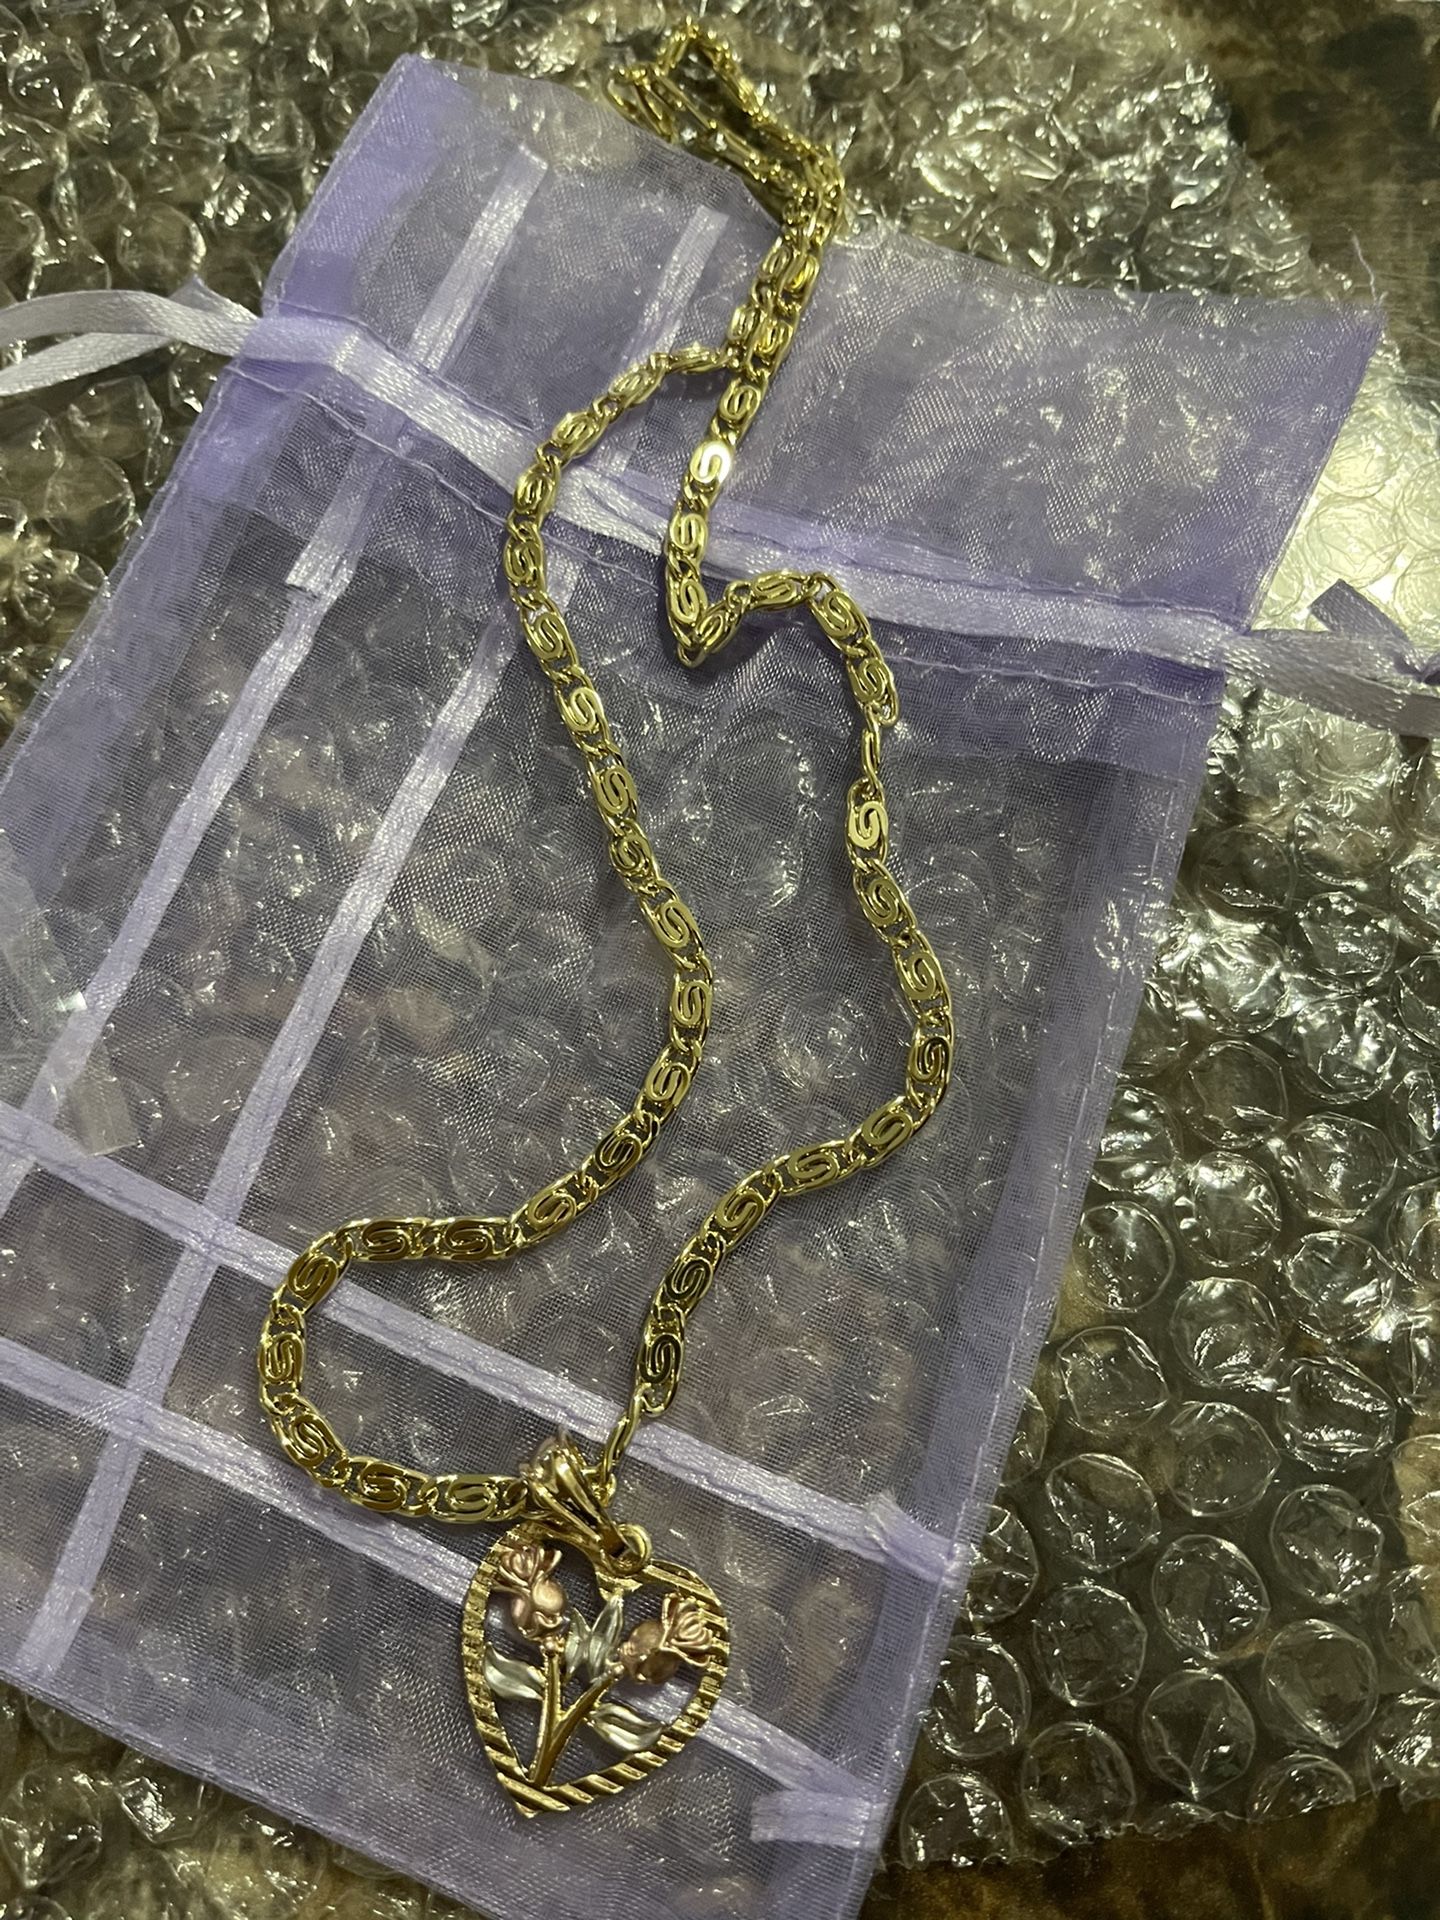 variety of jewelry in 14 and 18kt gold plate.  Prices vary depending on the length and thickness of the chains